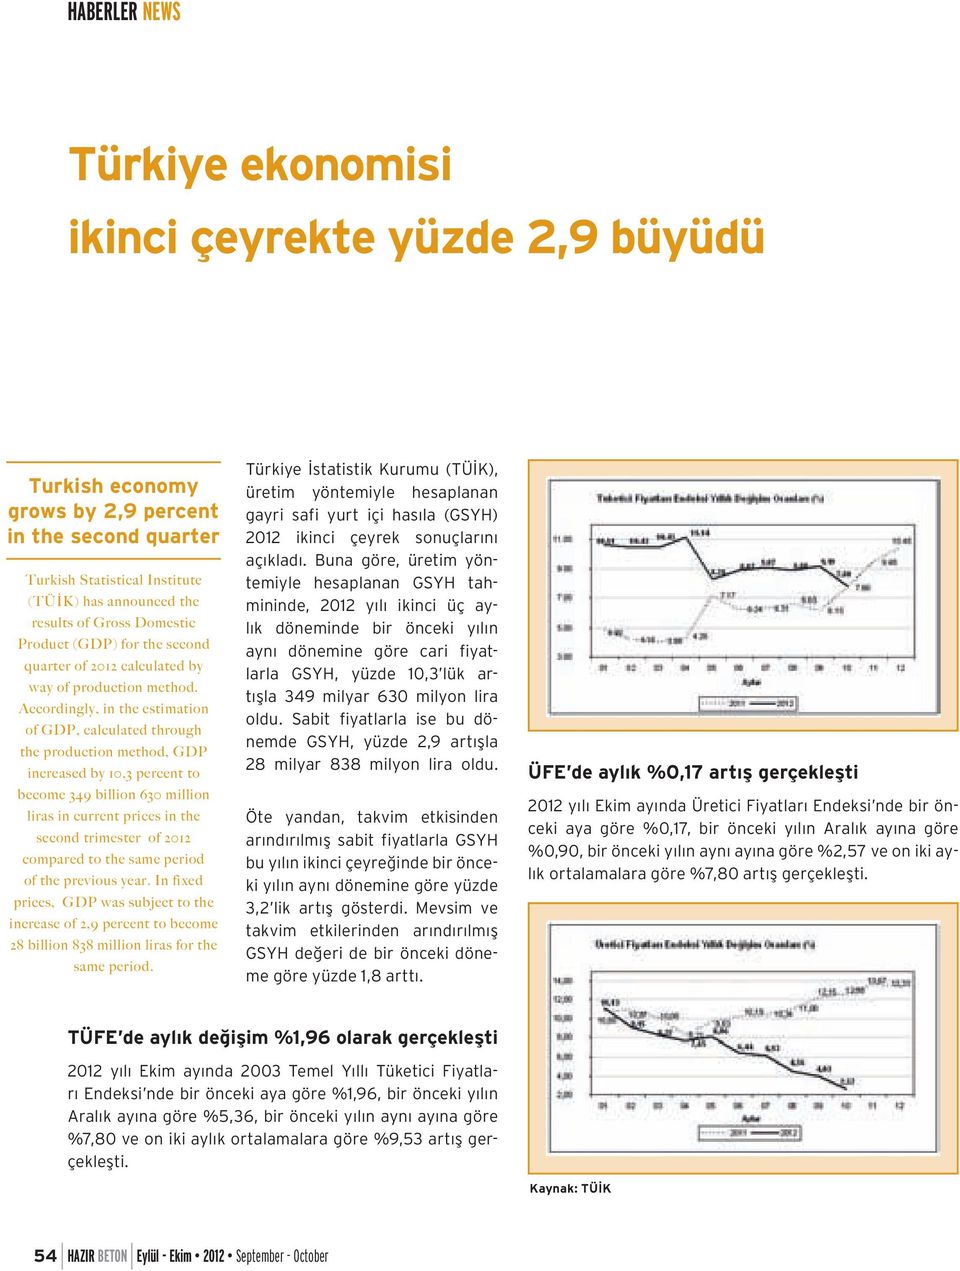 Accordingly, in the estimation of GDP, calculated through the production method, GDP increased by 10,3 percent to become 349 billion 630 million liras in current prices in the second trimester of